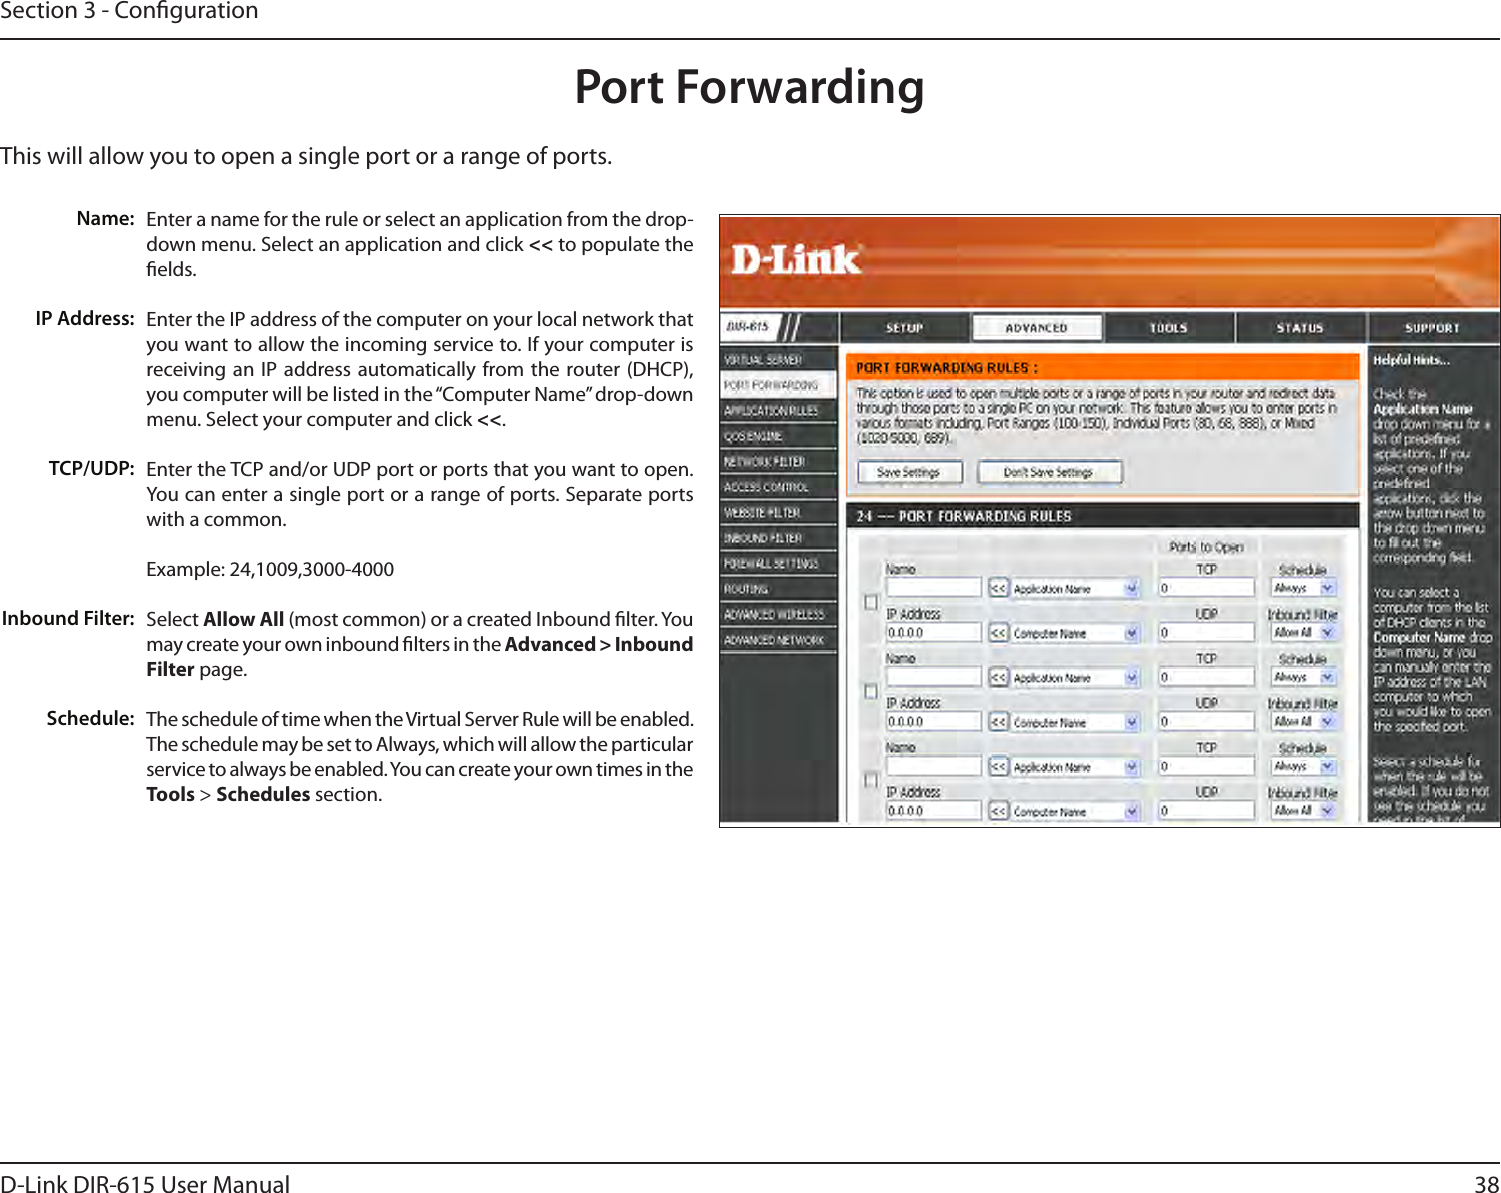 38D-Link DIR-615 User ManualSection 3 - CongurationThis will allow you to open a single port or a range of ports.Port ForwardingEnter a name for the rule or select an application from the drop-down menu. Select an application and click &lt;&lt; to populate the elds.Enter the IP address of the computer on your local network that you want to allow the incoming service to. If your computer is receiving an  IP  address automatically from the router (DHCP), you computer will be listed in the “Computer Name” drop-down menu. Select your computer and click &lt;&lt;. Enter the TCP and/or UDP port or ports that you want to open. You can enter a single port or a range of ports. Separate ports with a common.Example: 24,1009,3000-4000Select Allow All (most common) or a created Inbound lter. You may create your own inbound lters in the Advanced &gt; Inbound Filter page.The schedule of time when the Virtual Server Rule will be enabled. The schedule may be set to Always, which will allow the particular service to always be enabled. You can create your own times in the  Tools &gt; Schedules section.Name:IP Address:TCP/UDP:Inbound Filter:Schedule: